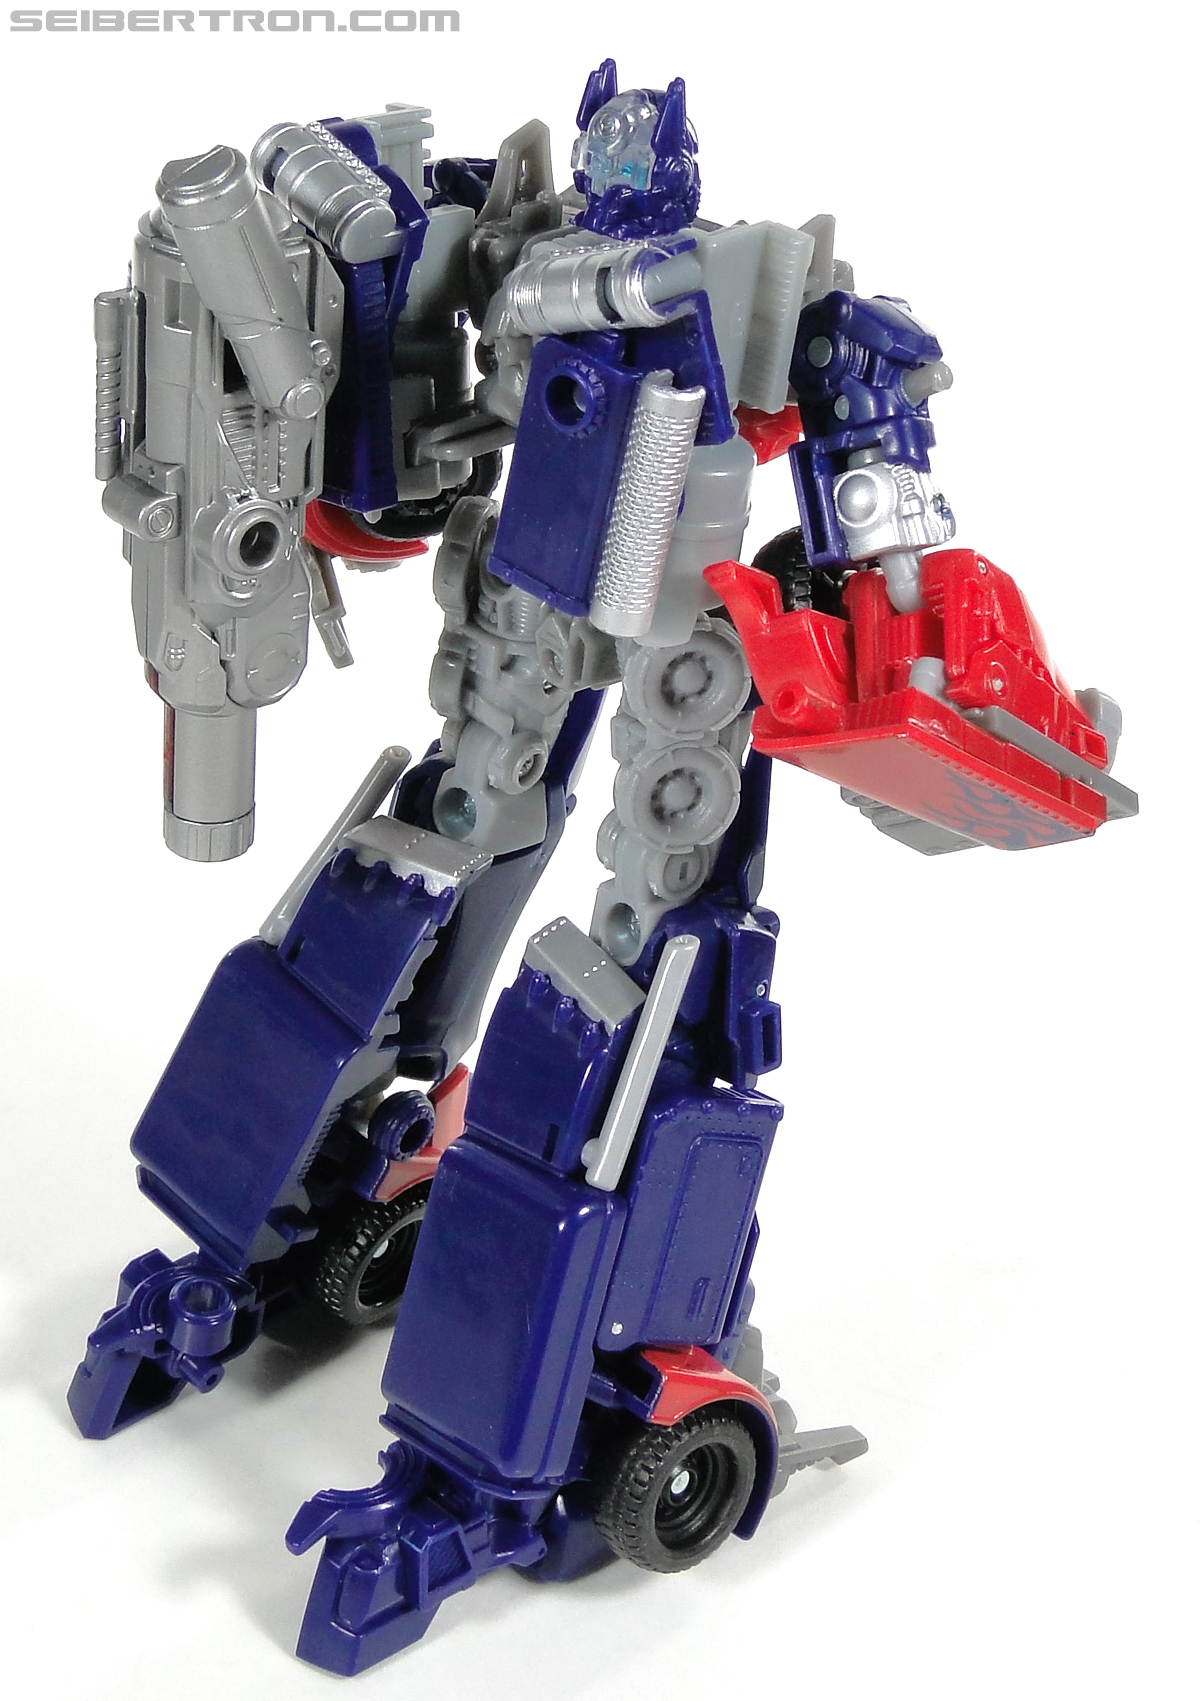 Transformers Dark of the Moon Optimus Prime with Mechtech Trailer (Image #133 of 248)